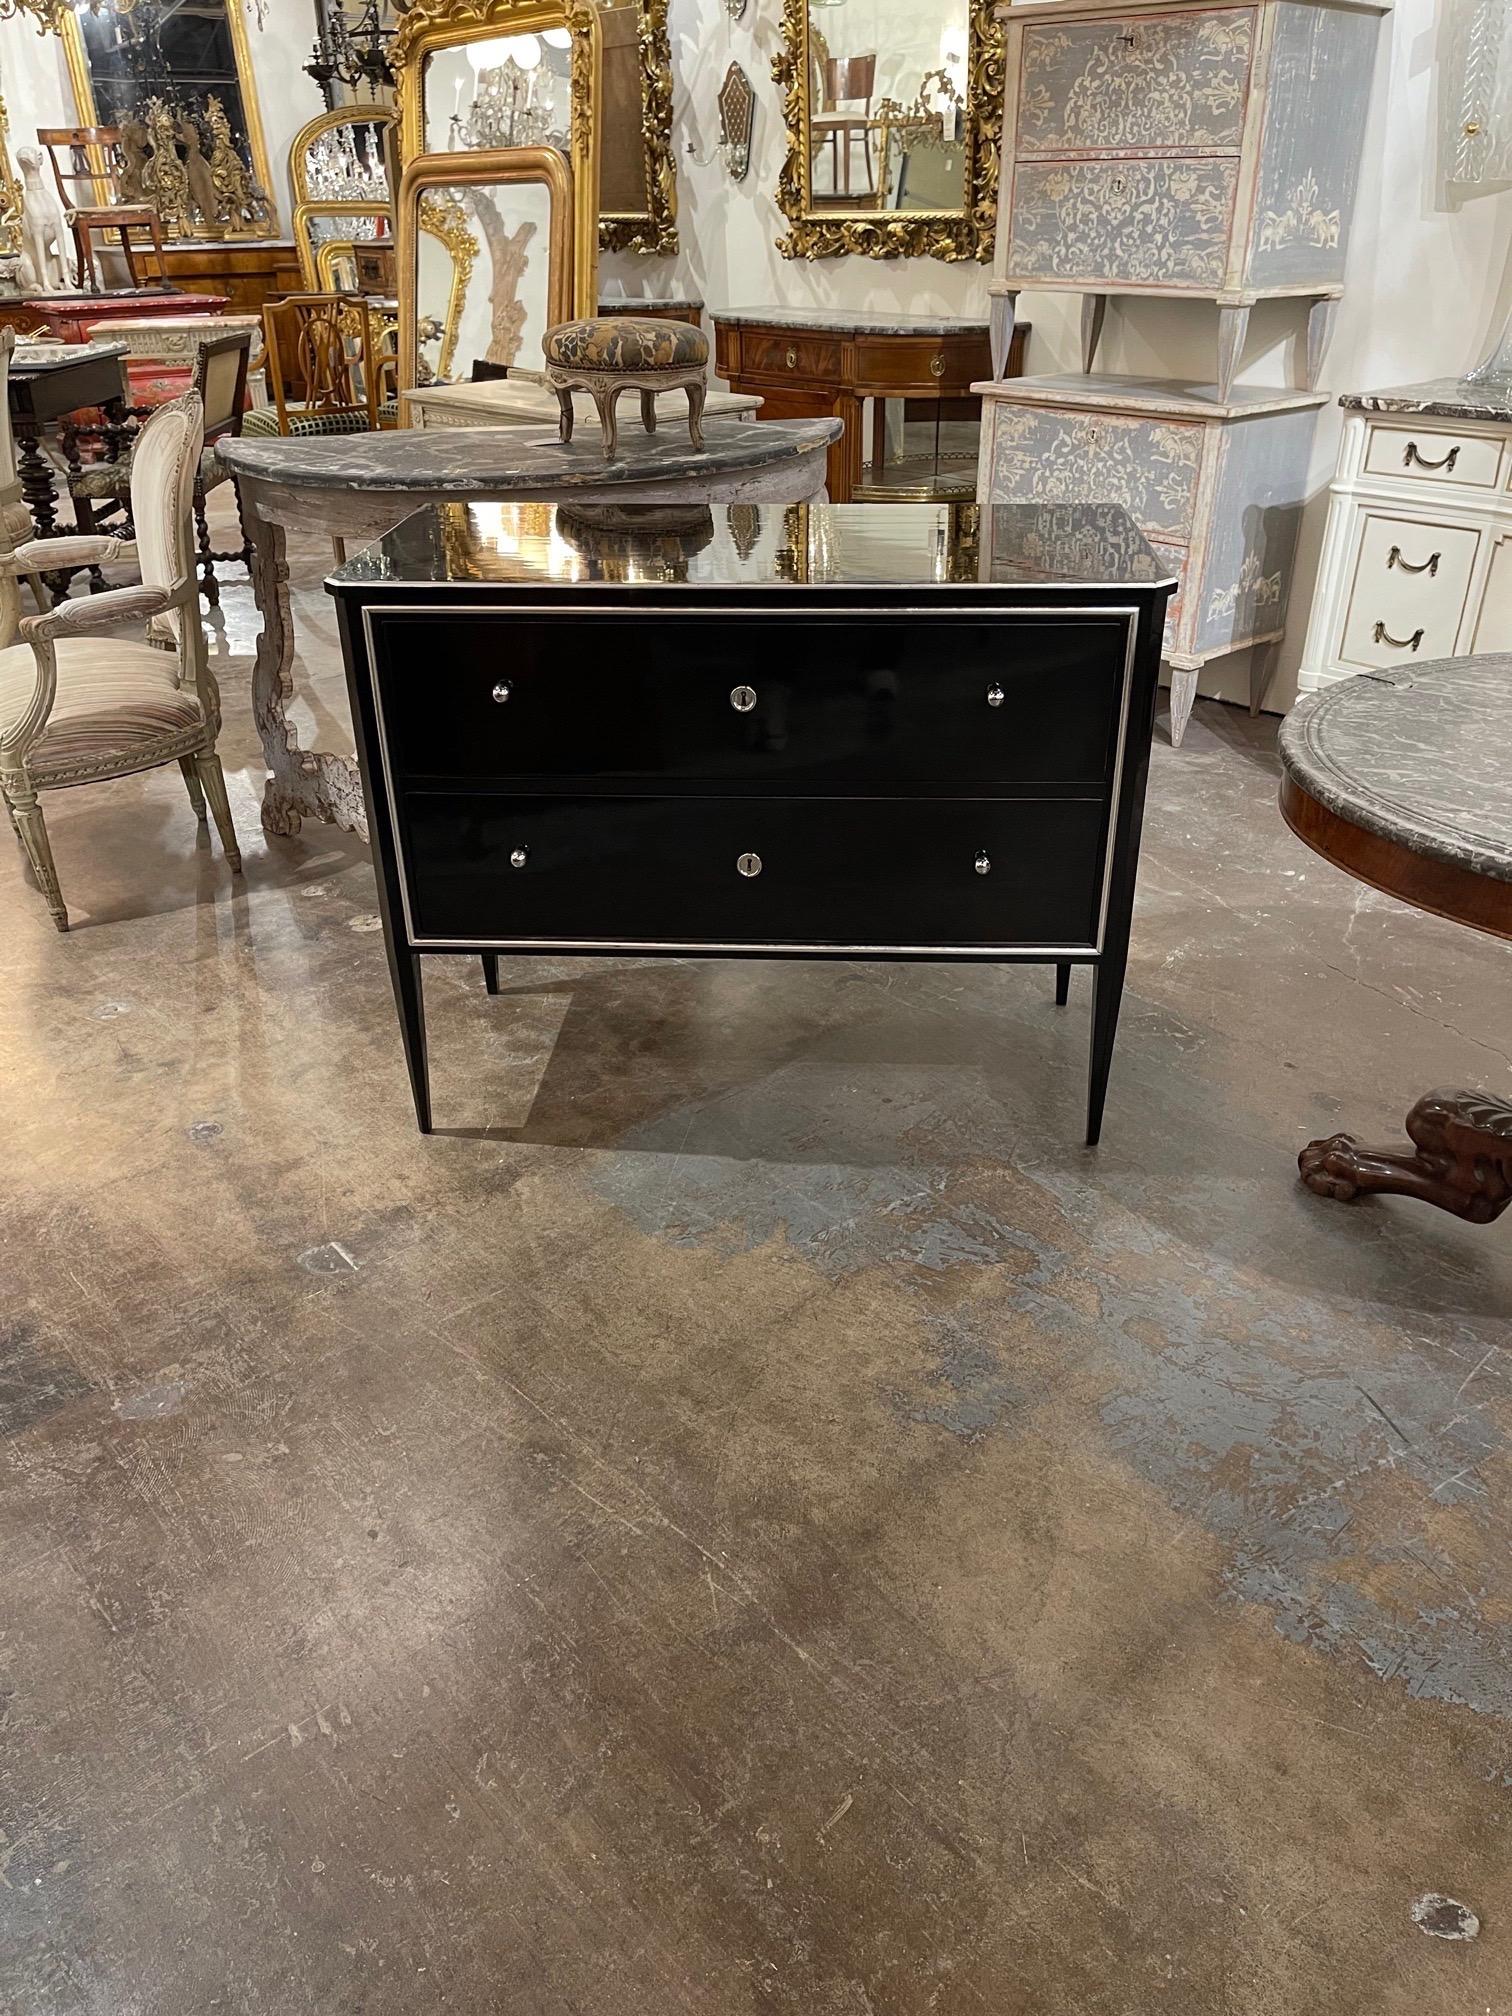 Period French Art Deco piano black and silver leaf 2 drawer commode. This piece has an exceptional finish. Very stylish!!